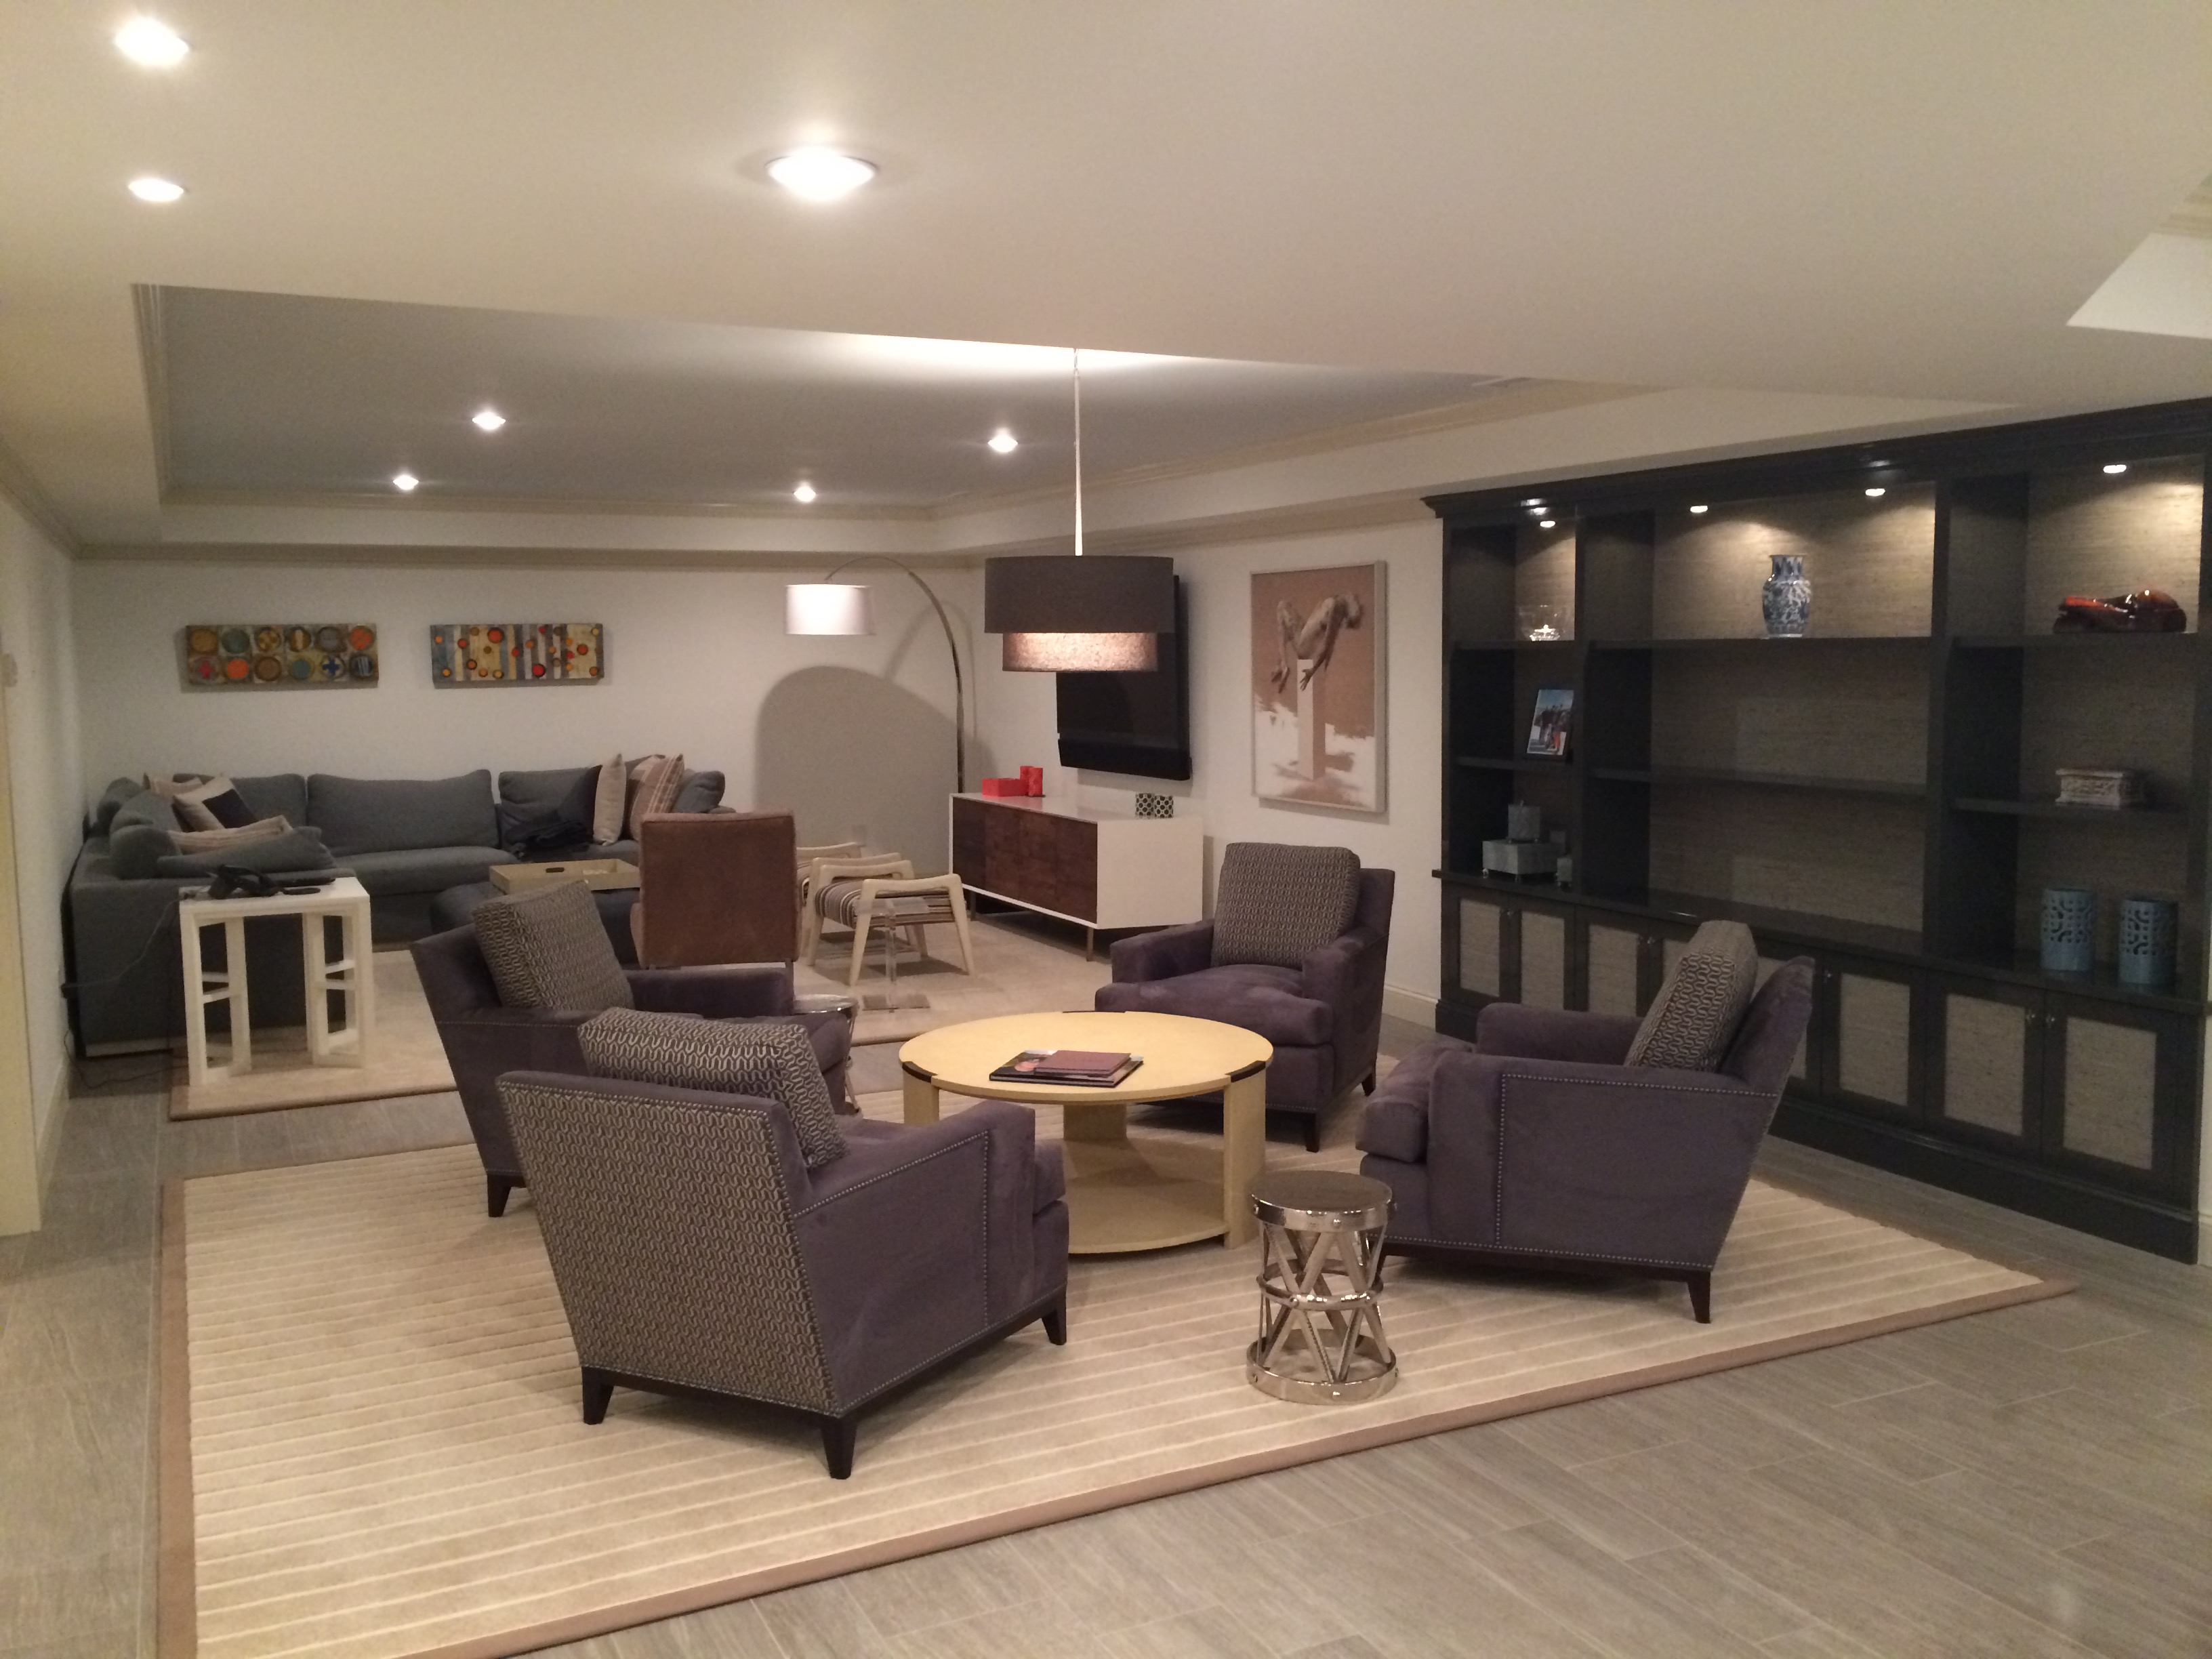 Finished Basement Project in Newtown, CT